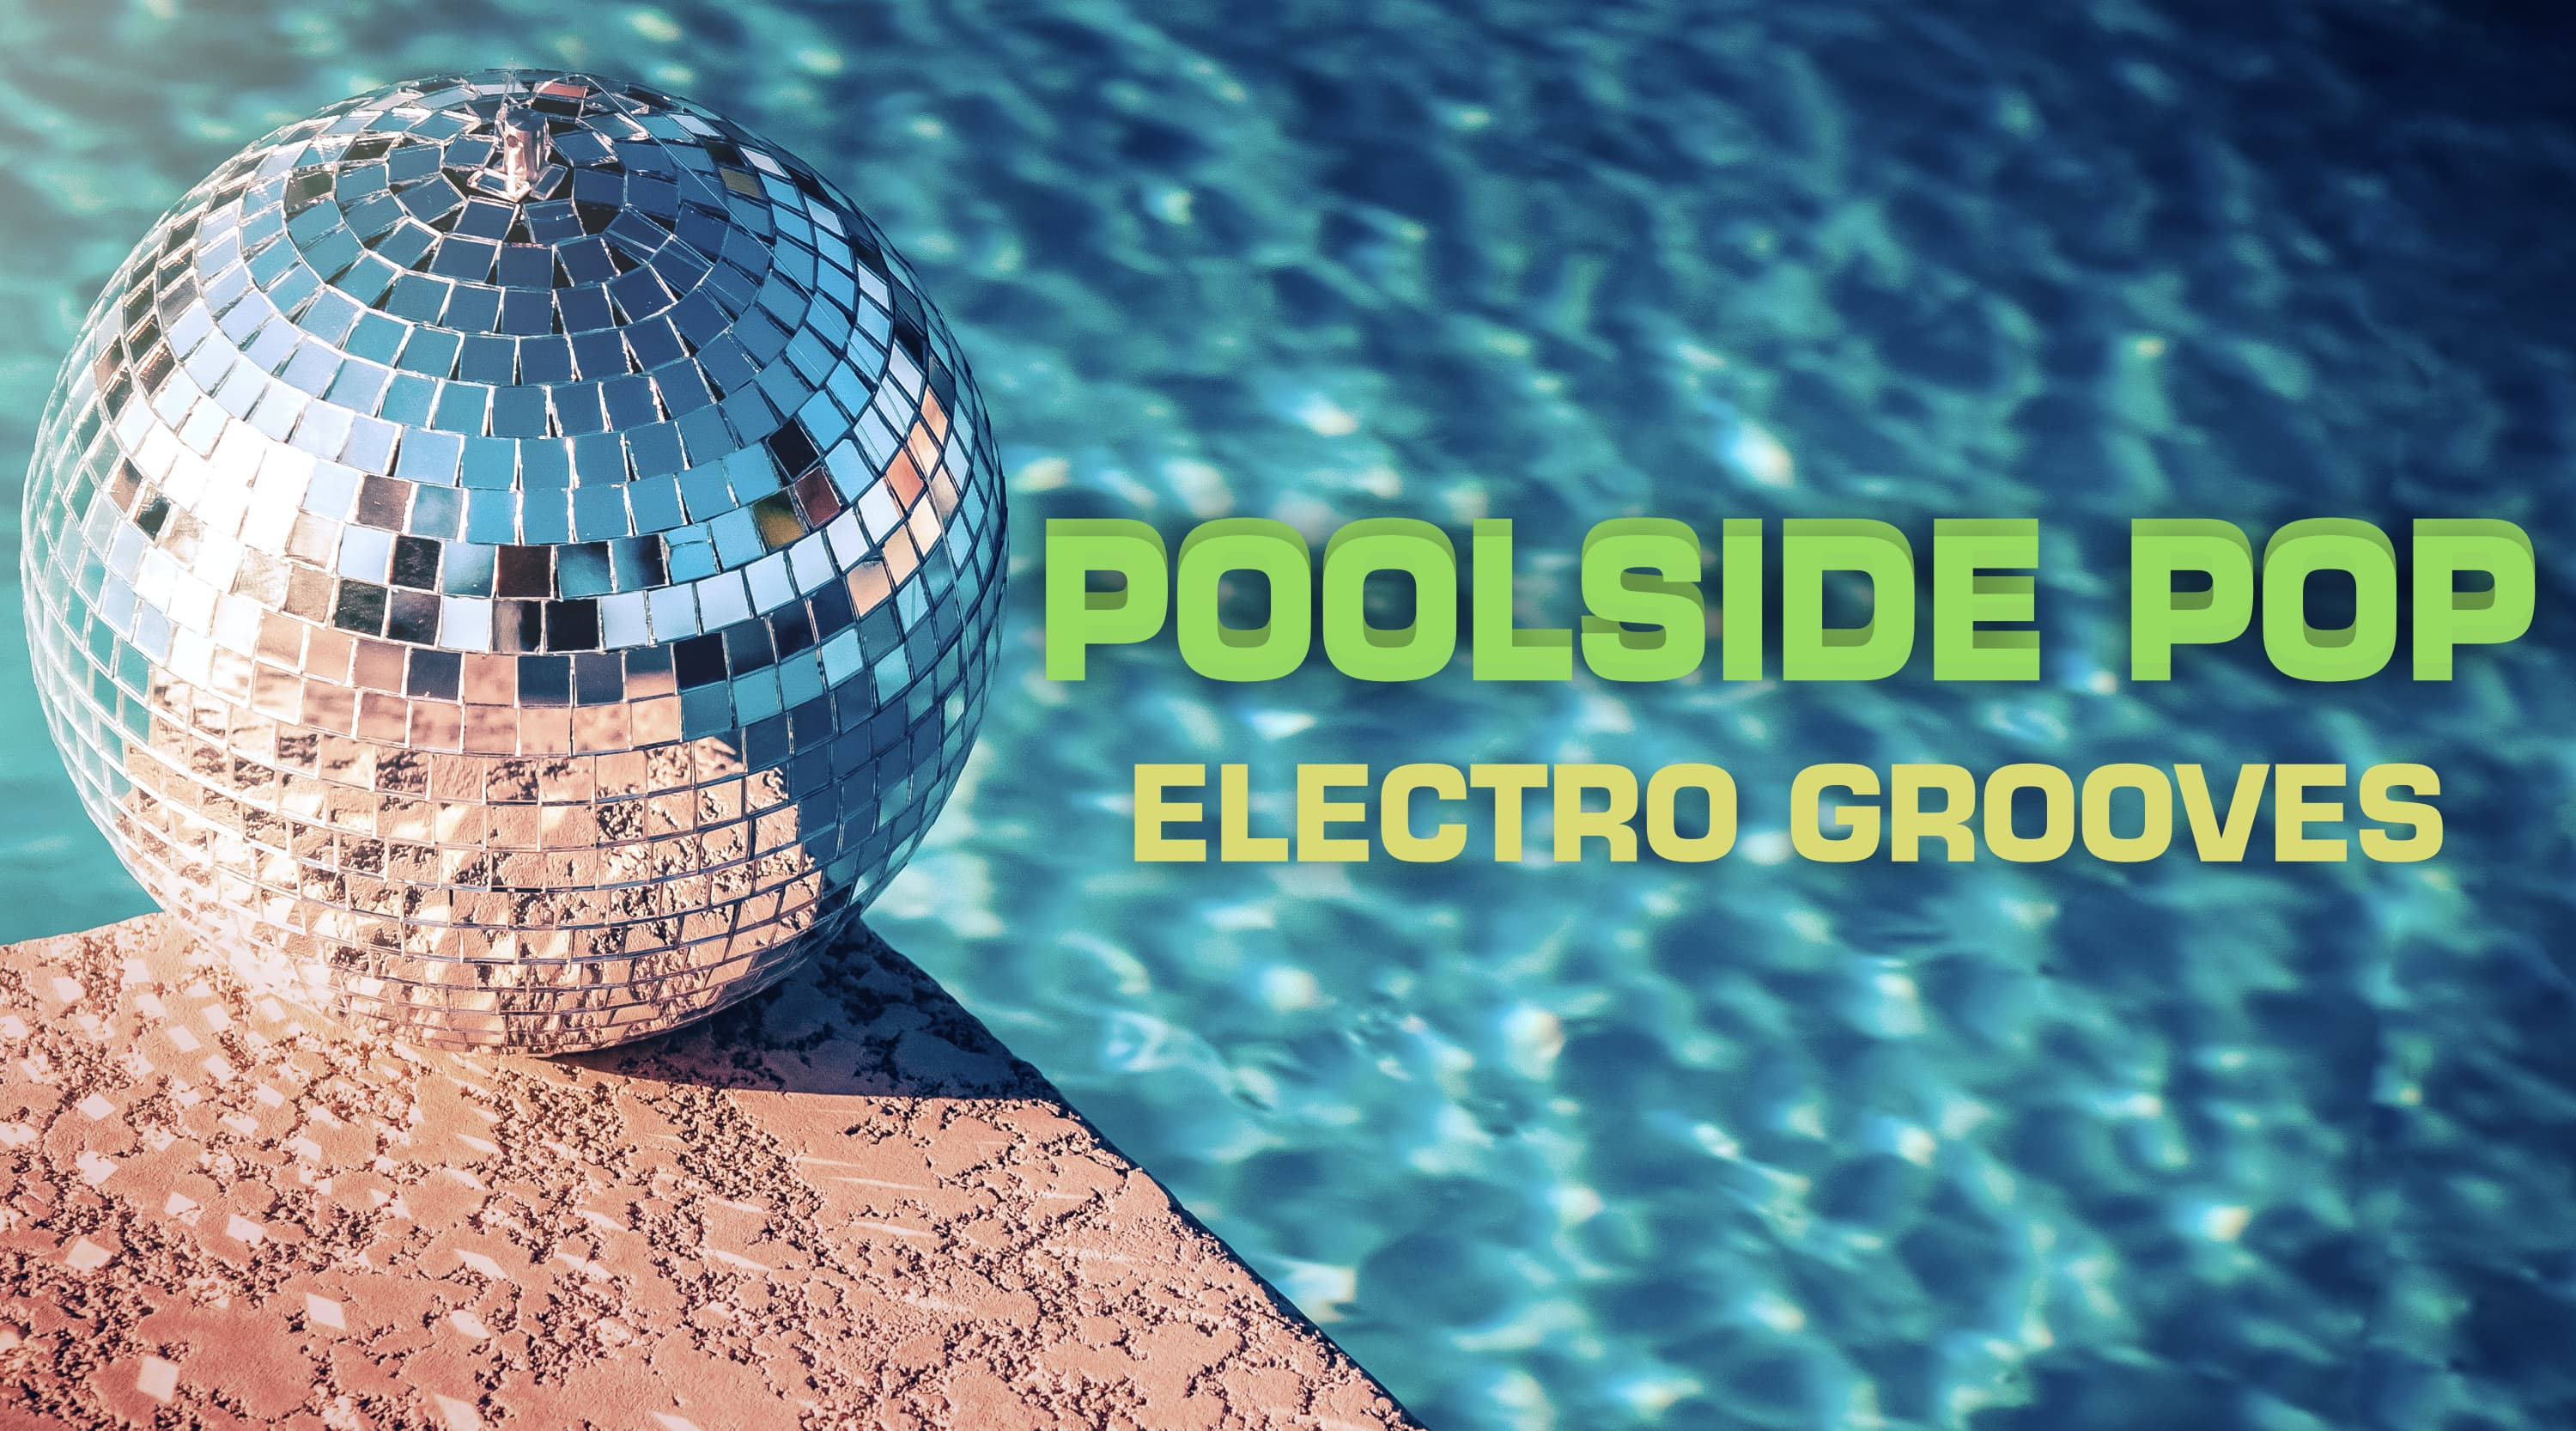 Poolside Pop: Electro Grooves